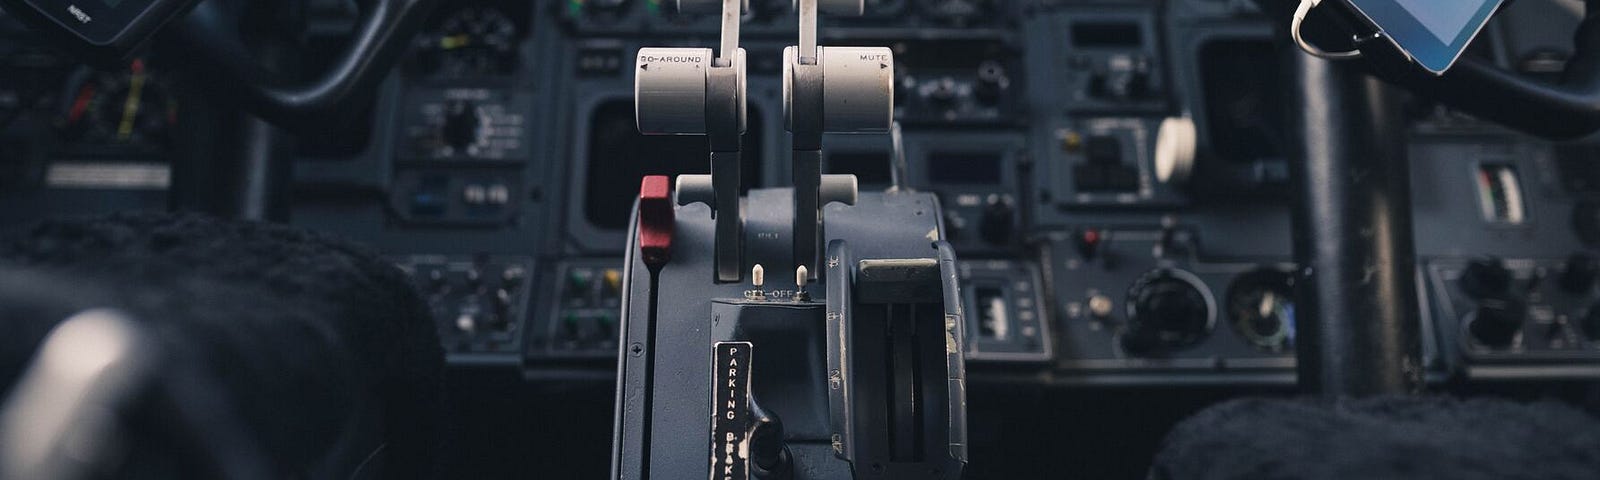 Image shows a cockpit with a thrust lever, many buttons, switches, and screens that is supposed to visualize complexity and potential of Microsoft Configuration Manager (SCCM or MECM).